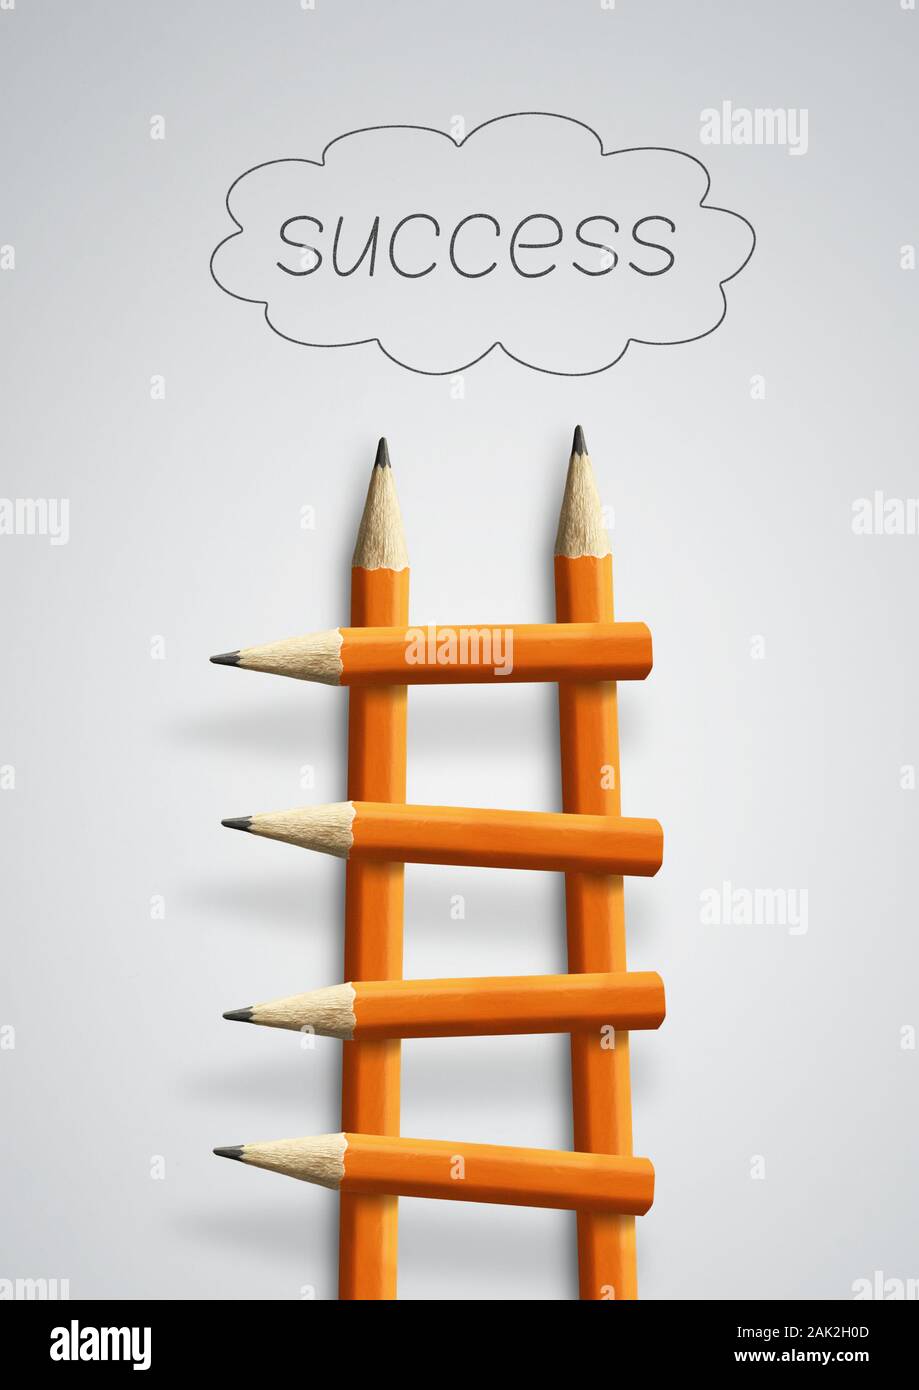 Stairs to success, business concept, pencil ladder Stock Photo